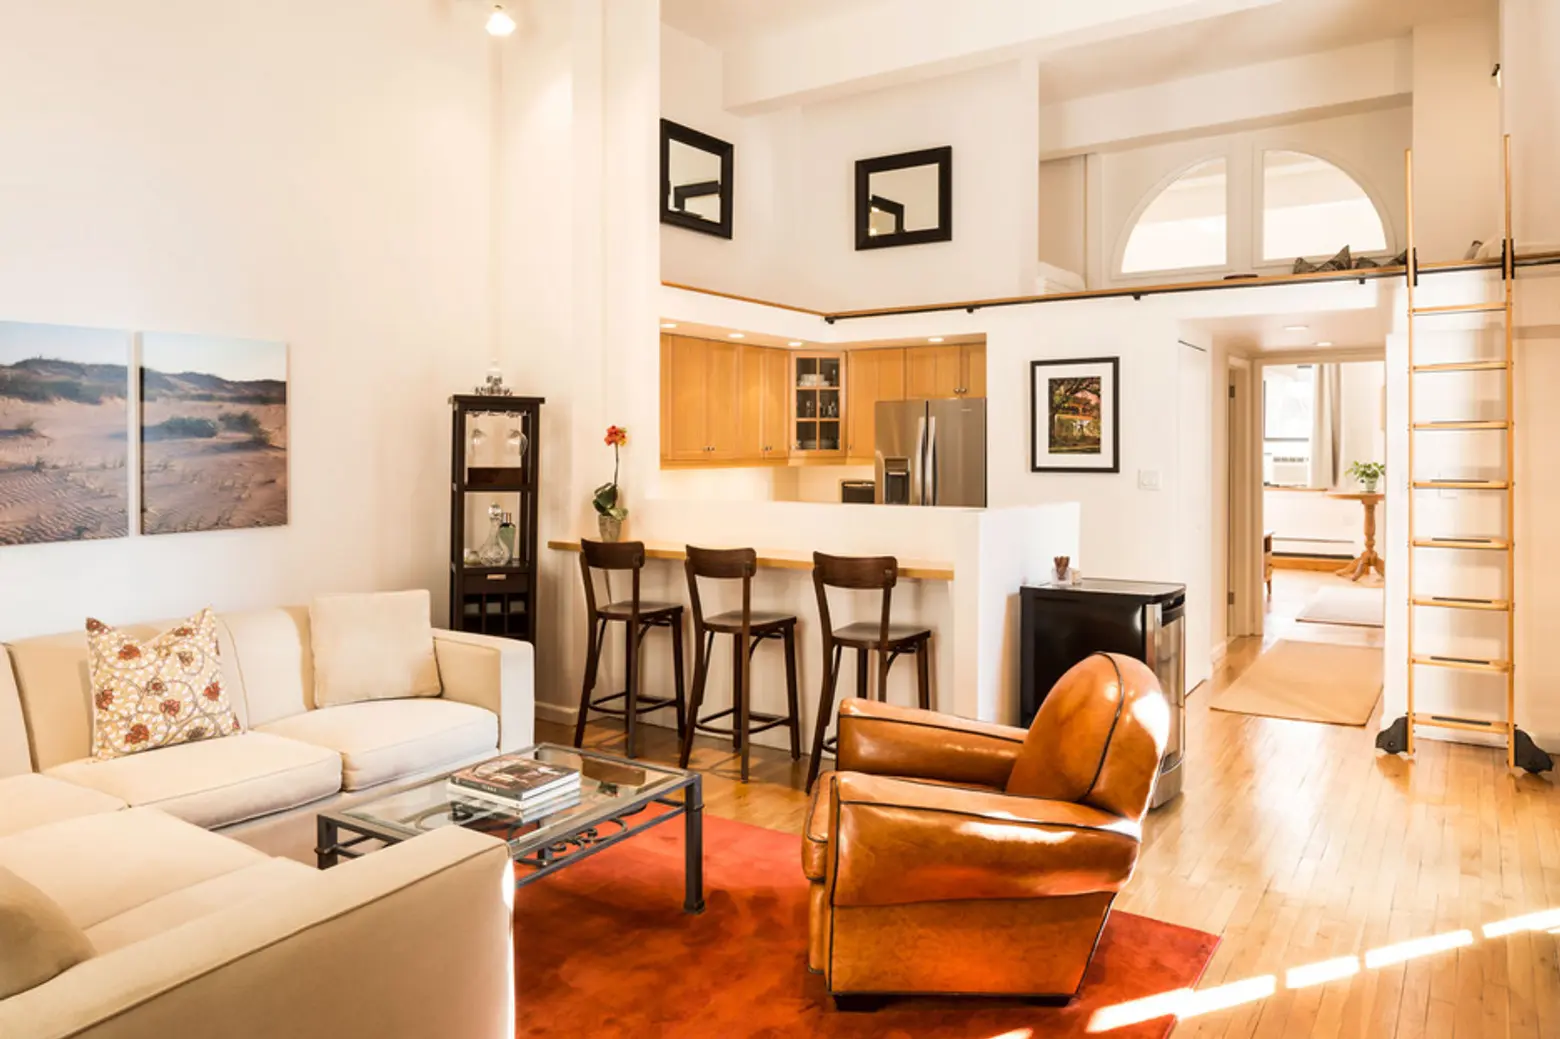 For $1.7M, This ‘Flexible’ West Village Loft Will Have You Climbing the Walls